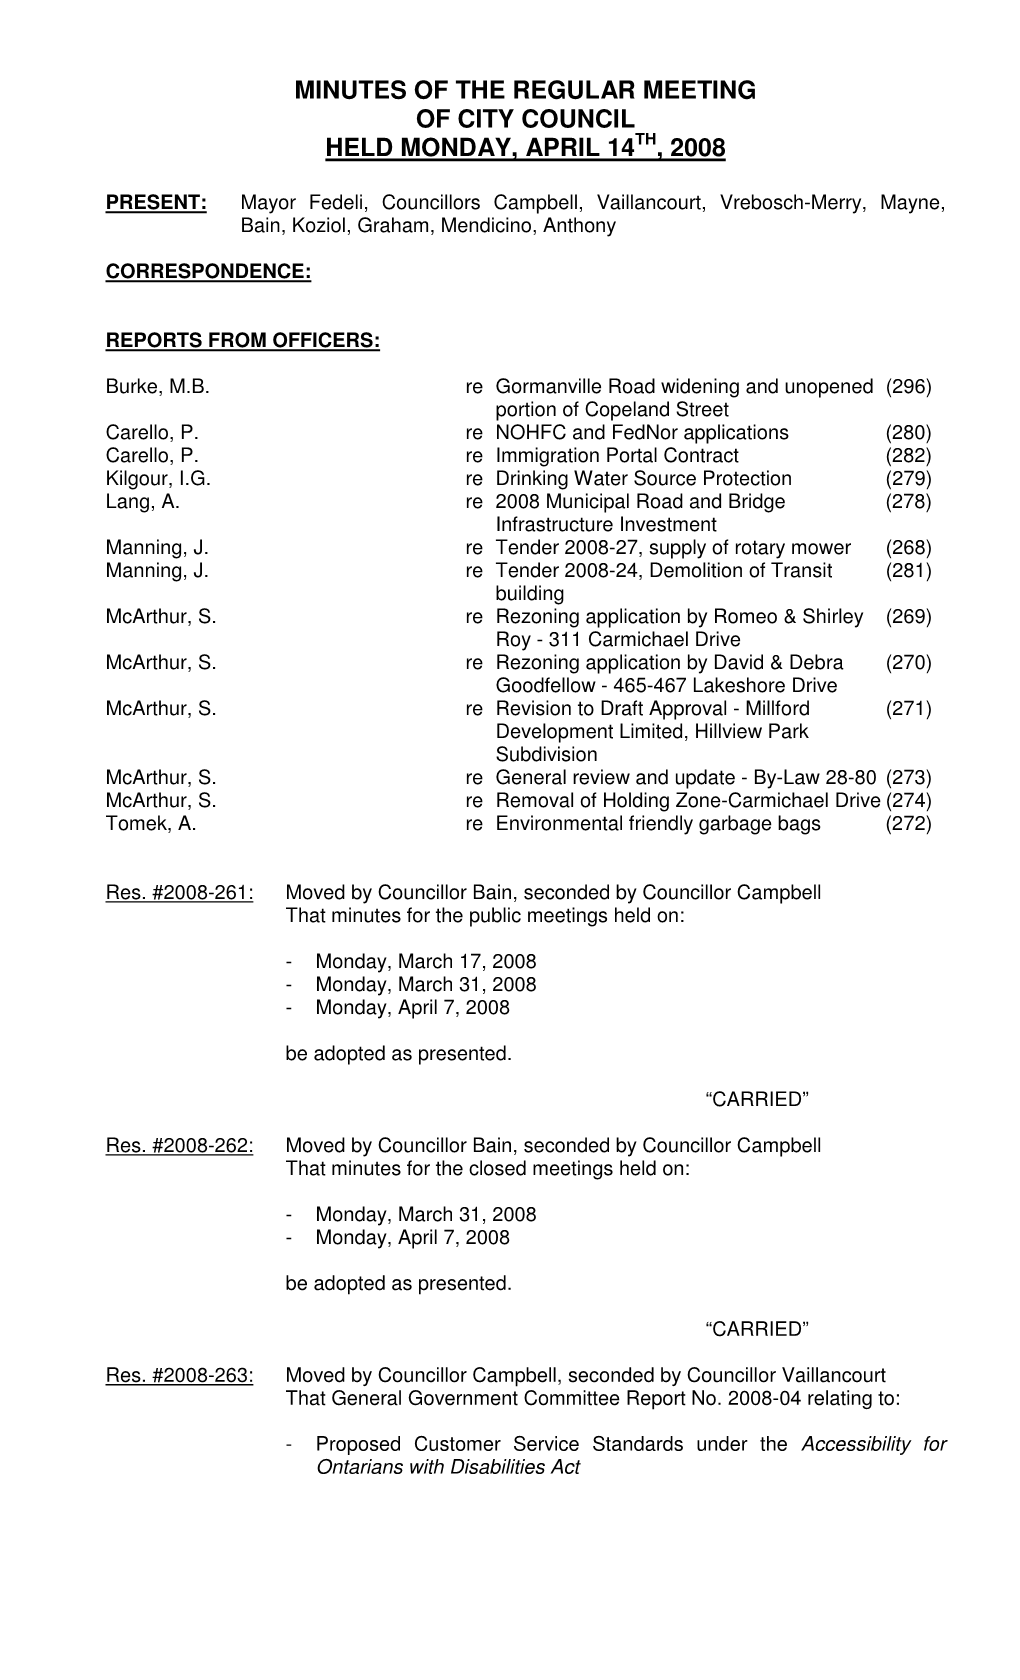 Minutes of the Regular Meeting of City Council Held Monday, April 14 , 2008